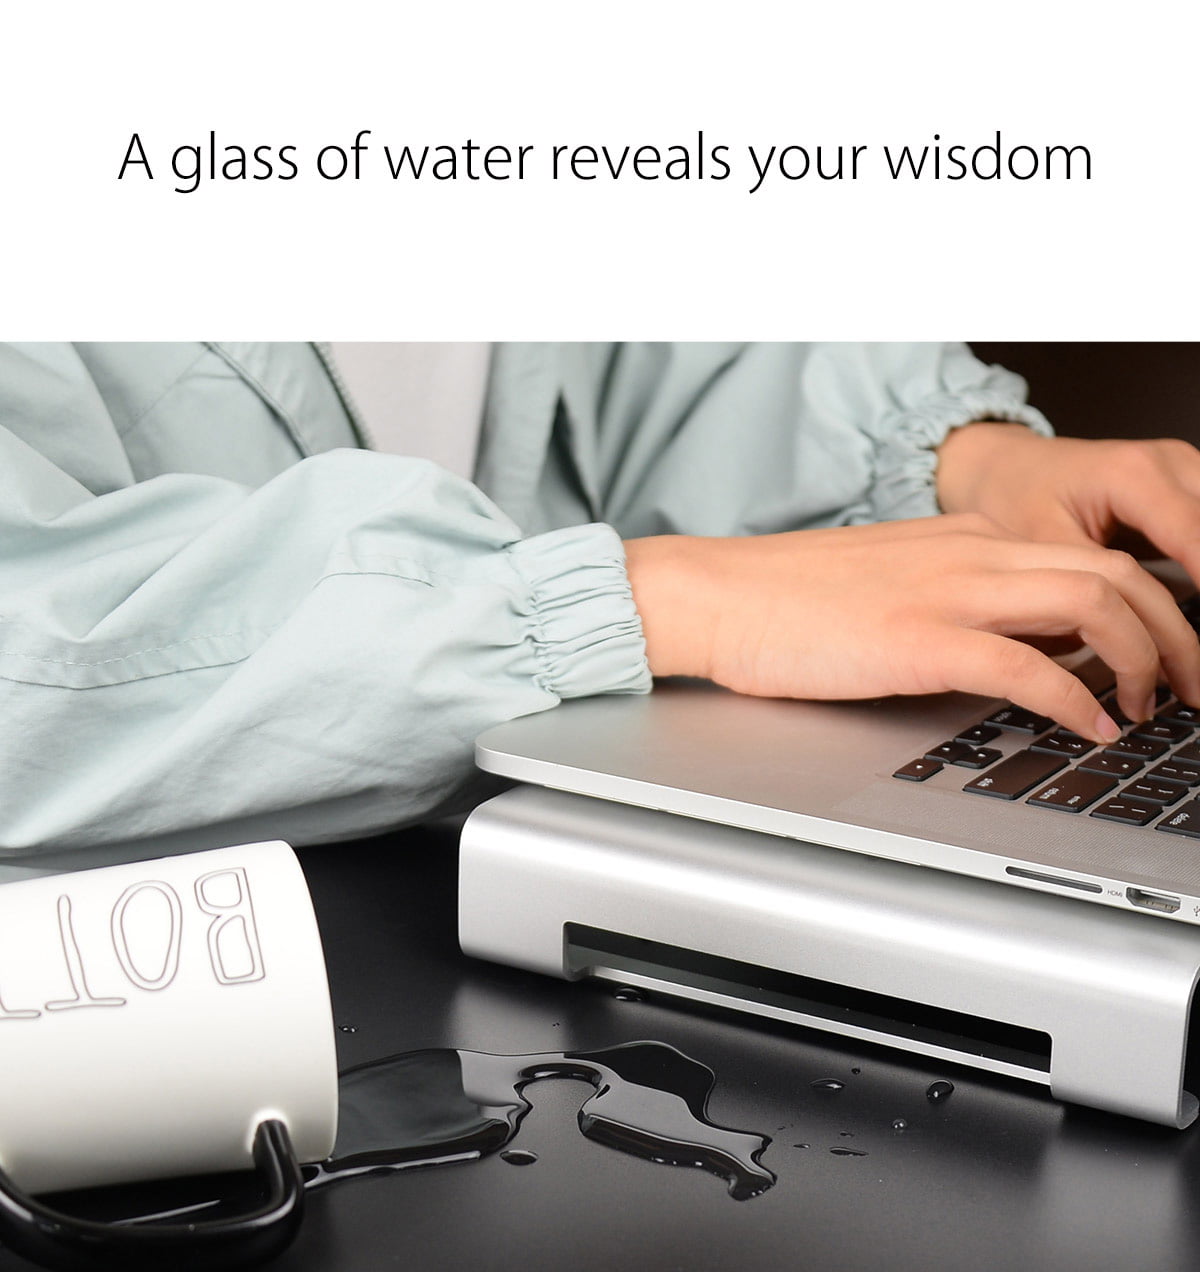 A glass of water reveals your wisdom